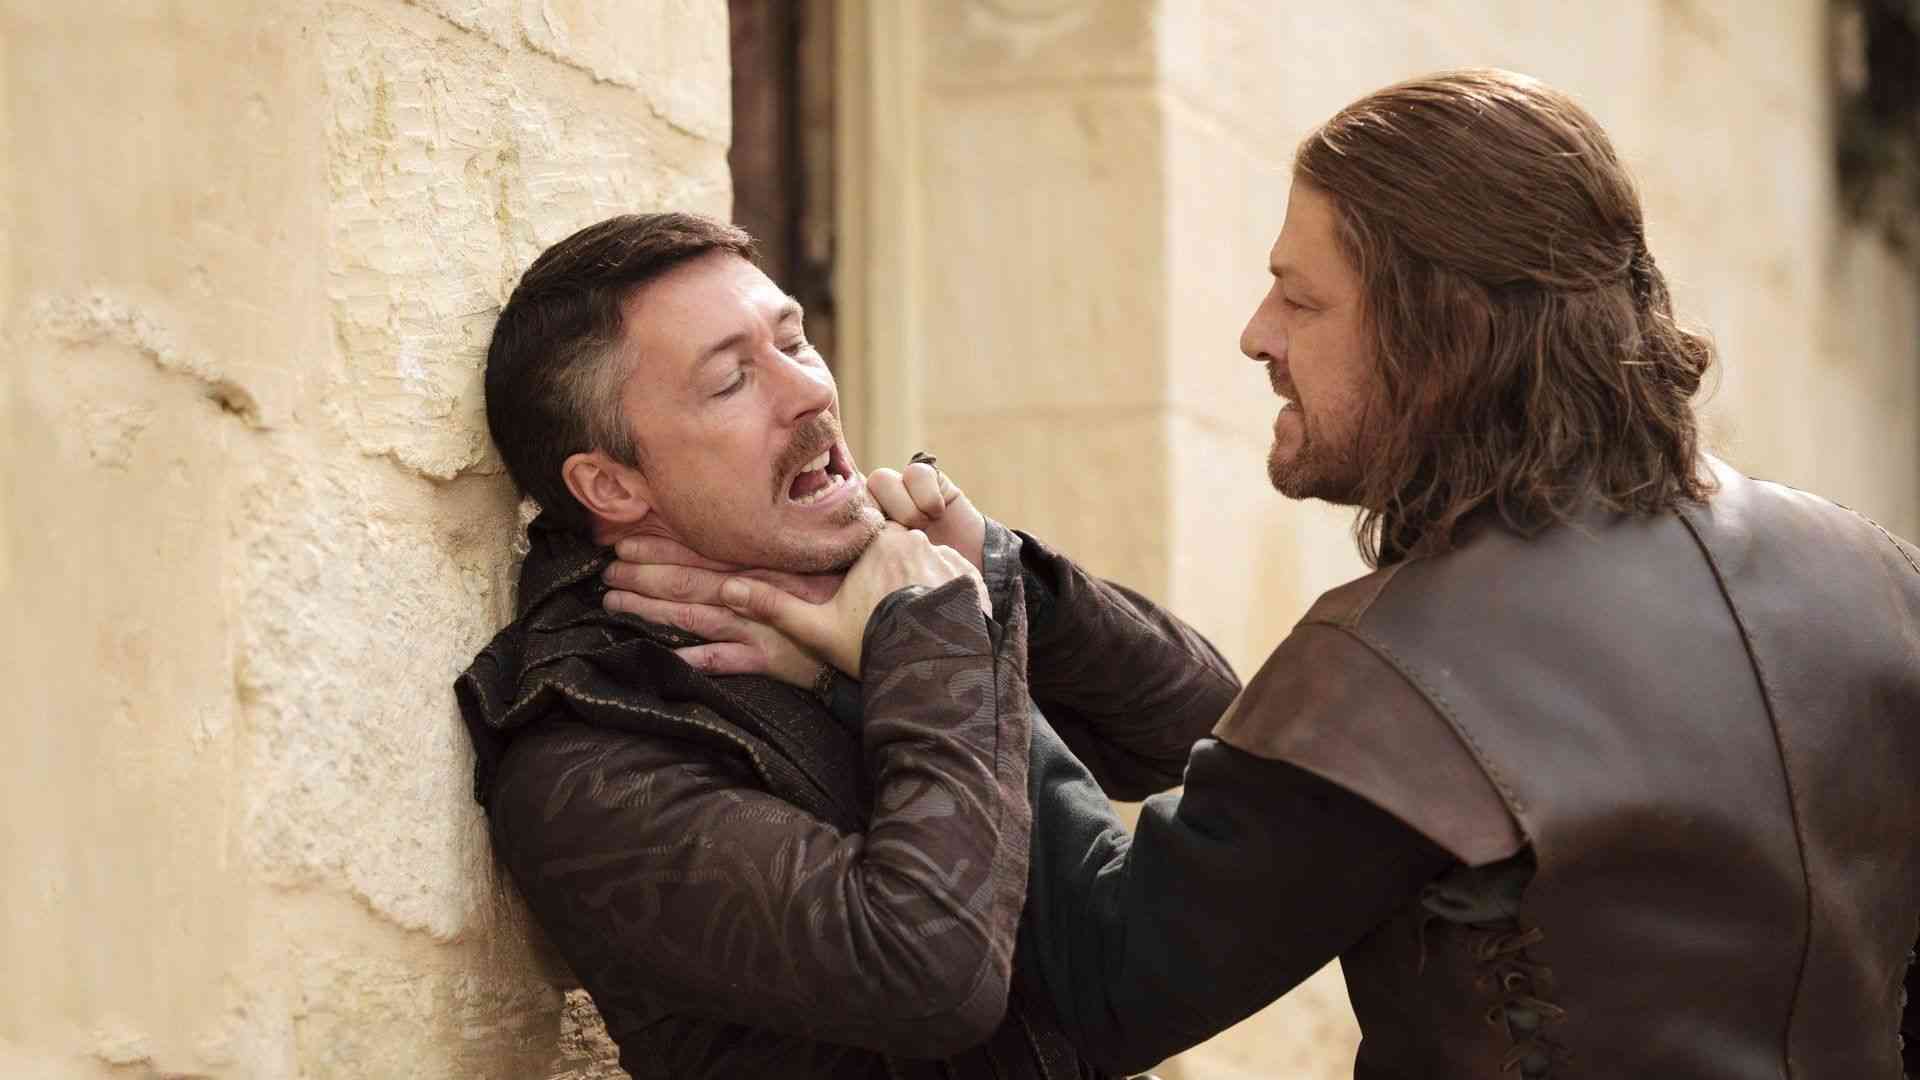 ned stark talked about game of thrones big 1